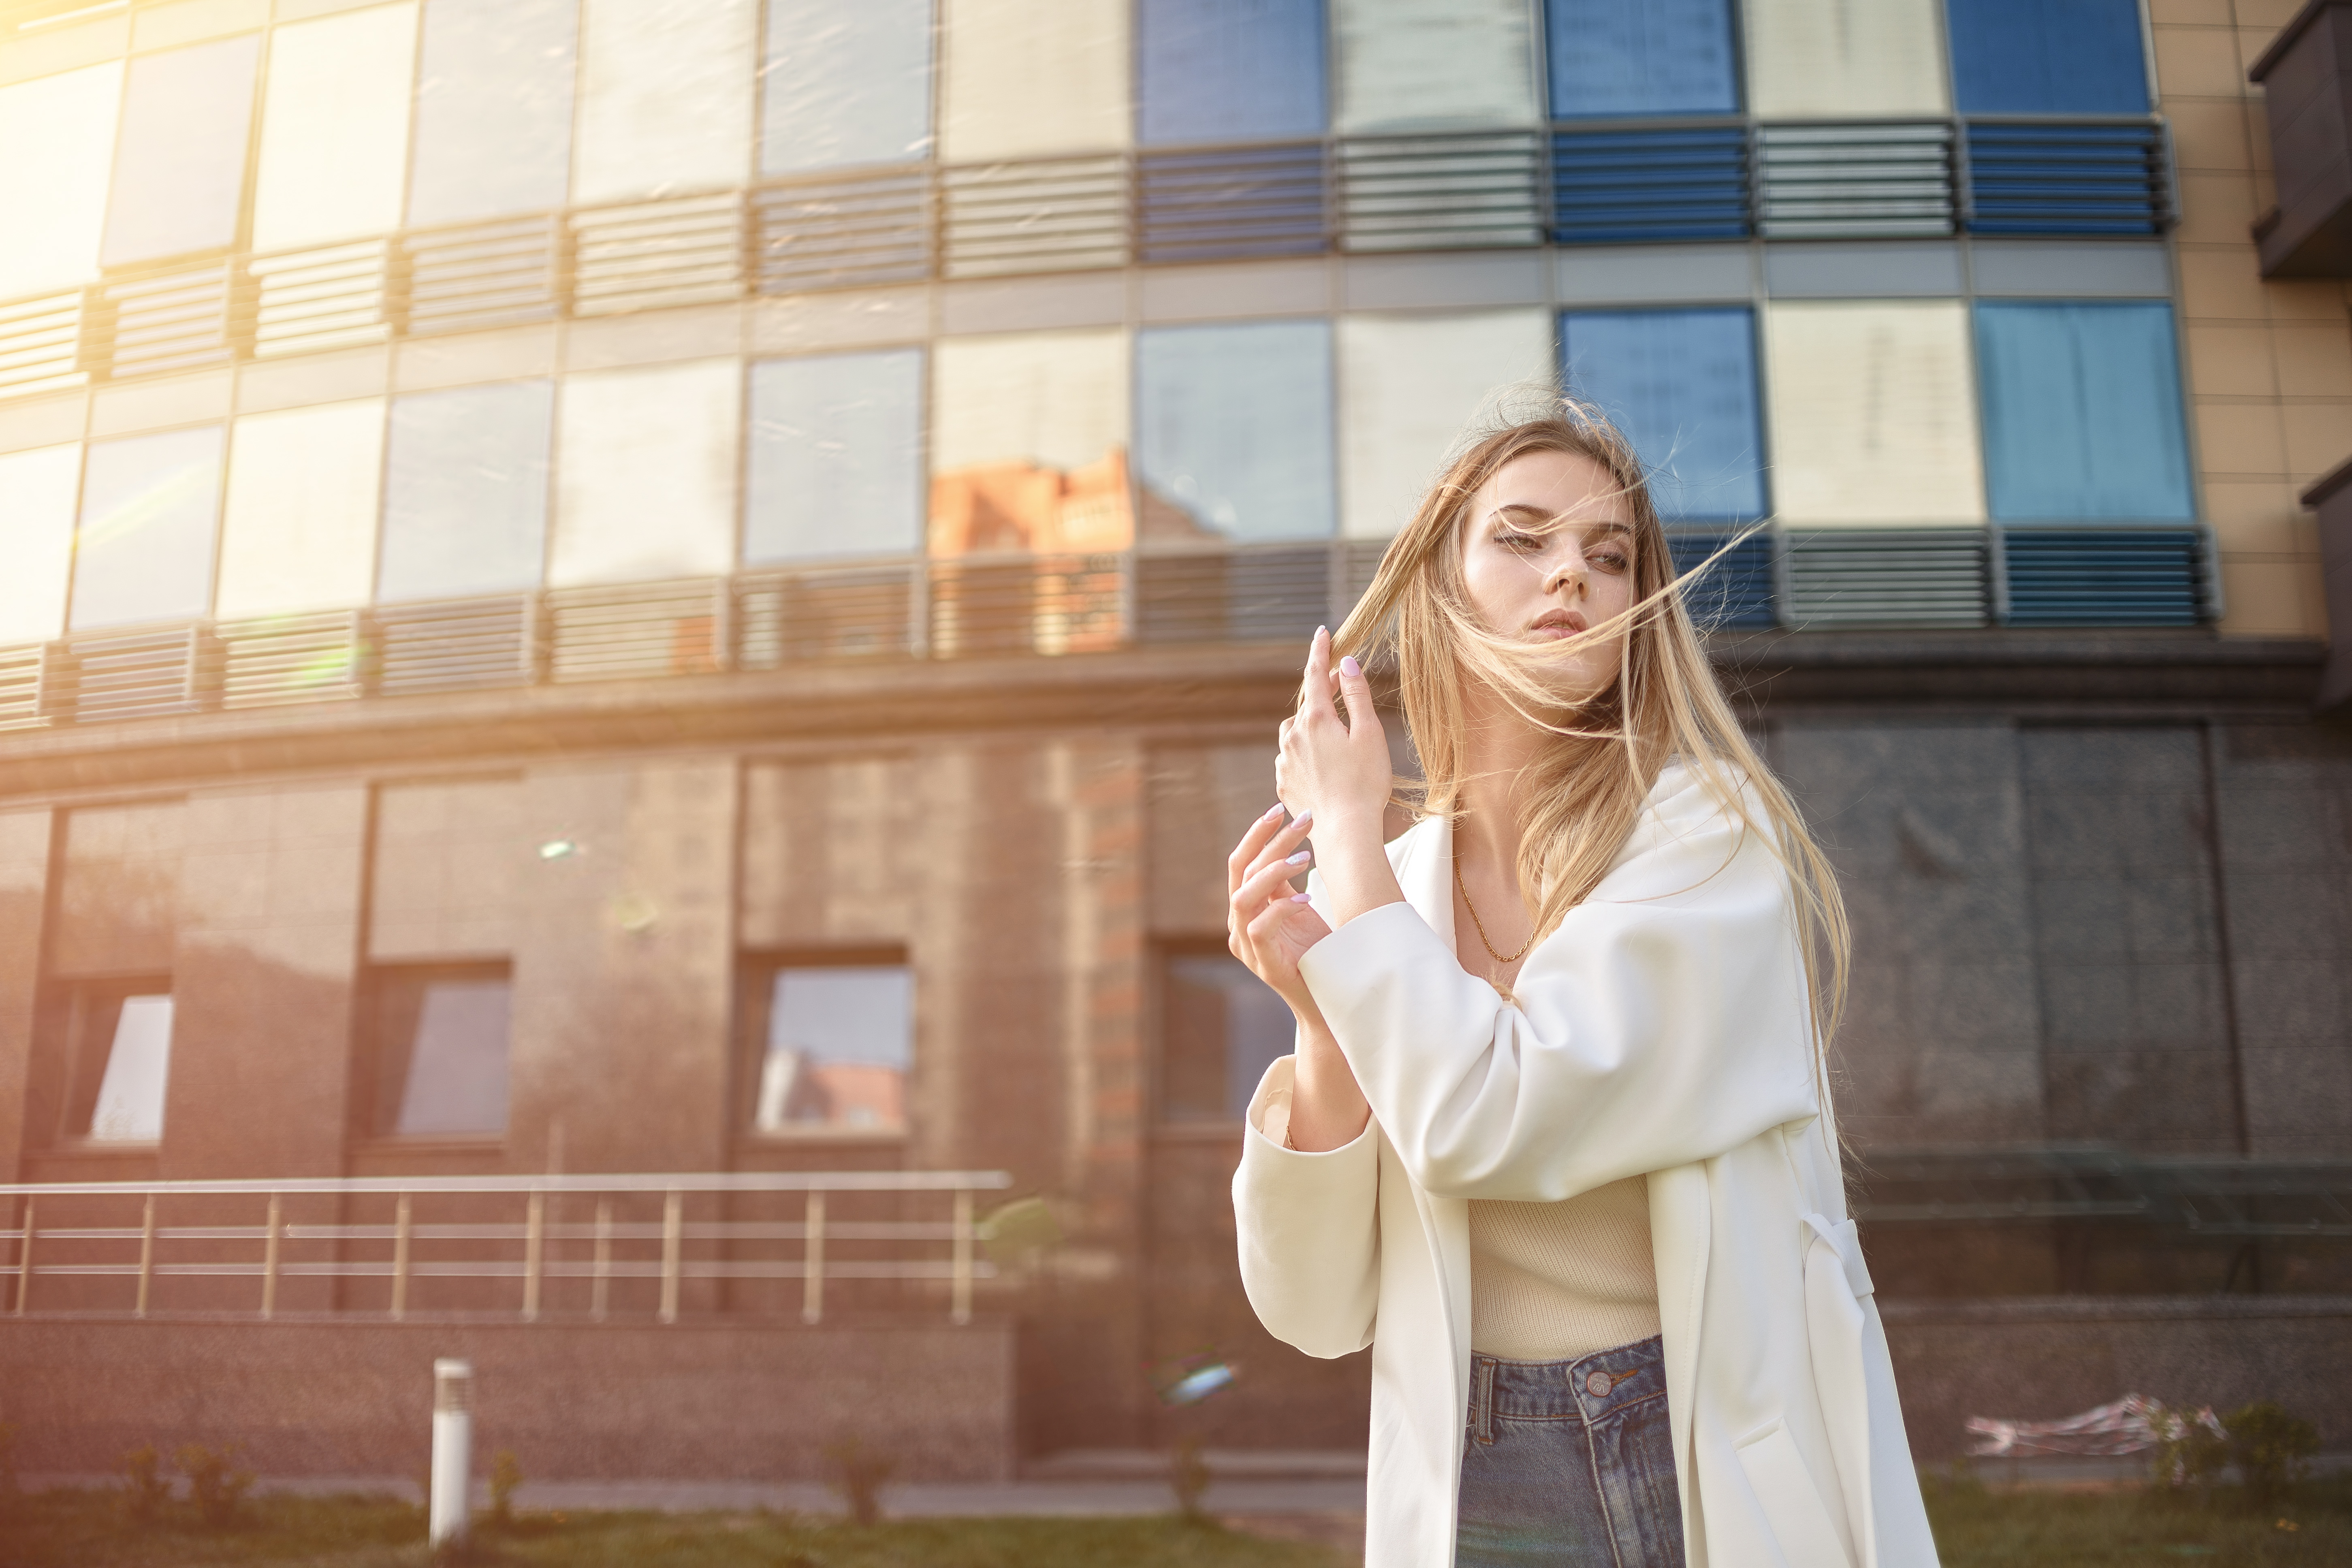 People 5806x3871 women Dmitry Medved blonde jeans white coat coats windy hair in face overcoats hair blowing in the wind urban open coat women outdoors looking away long hair model white clothing overexposed